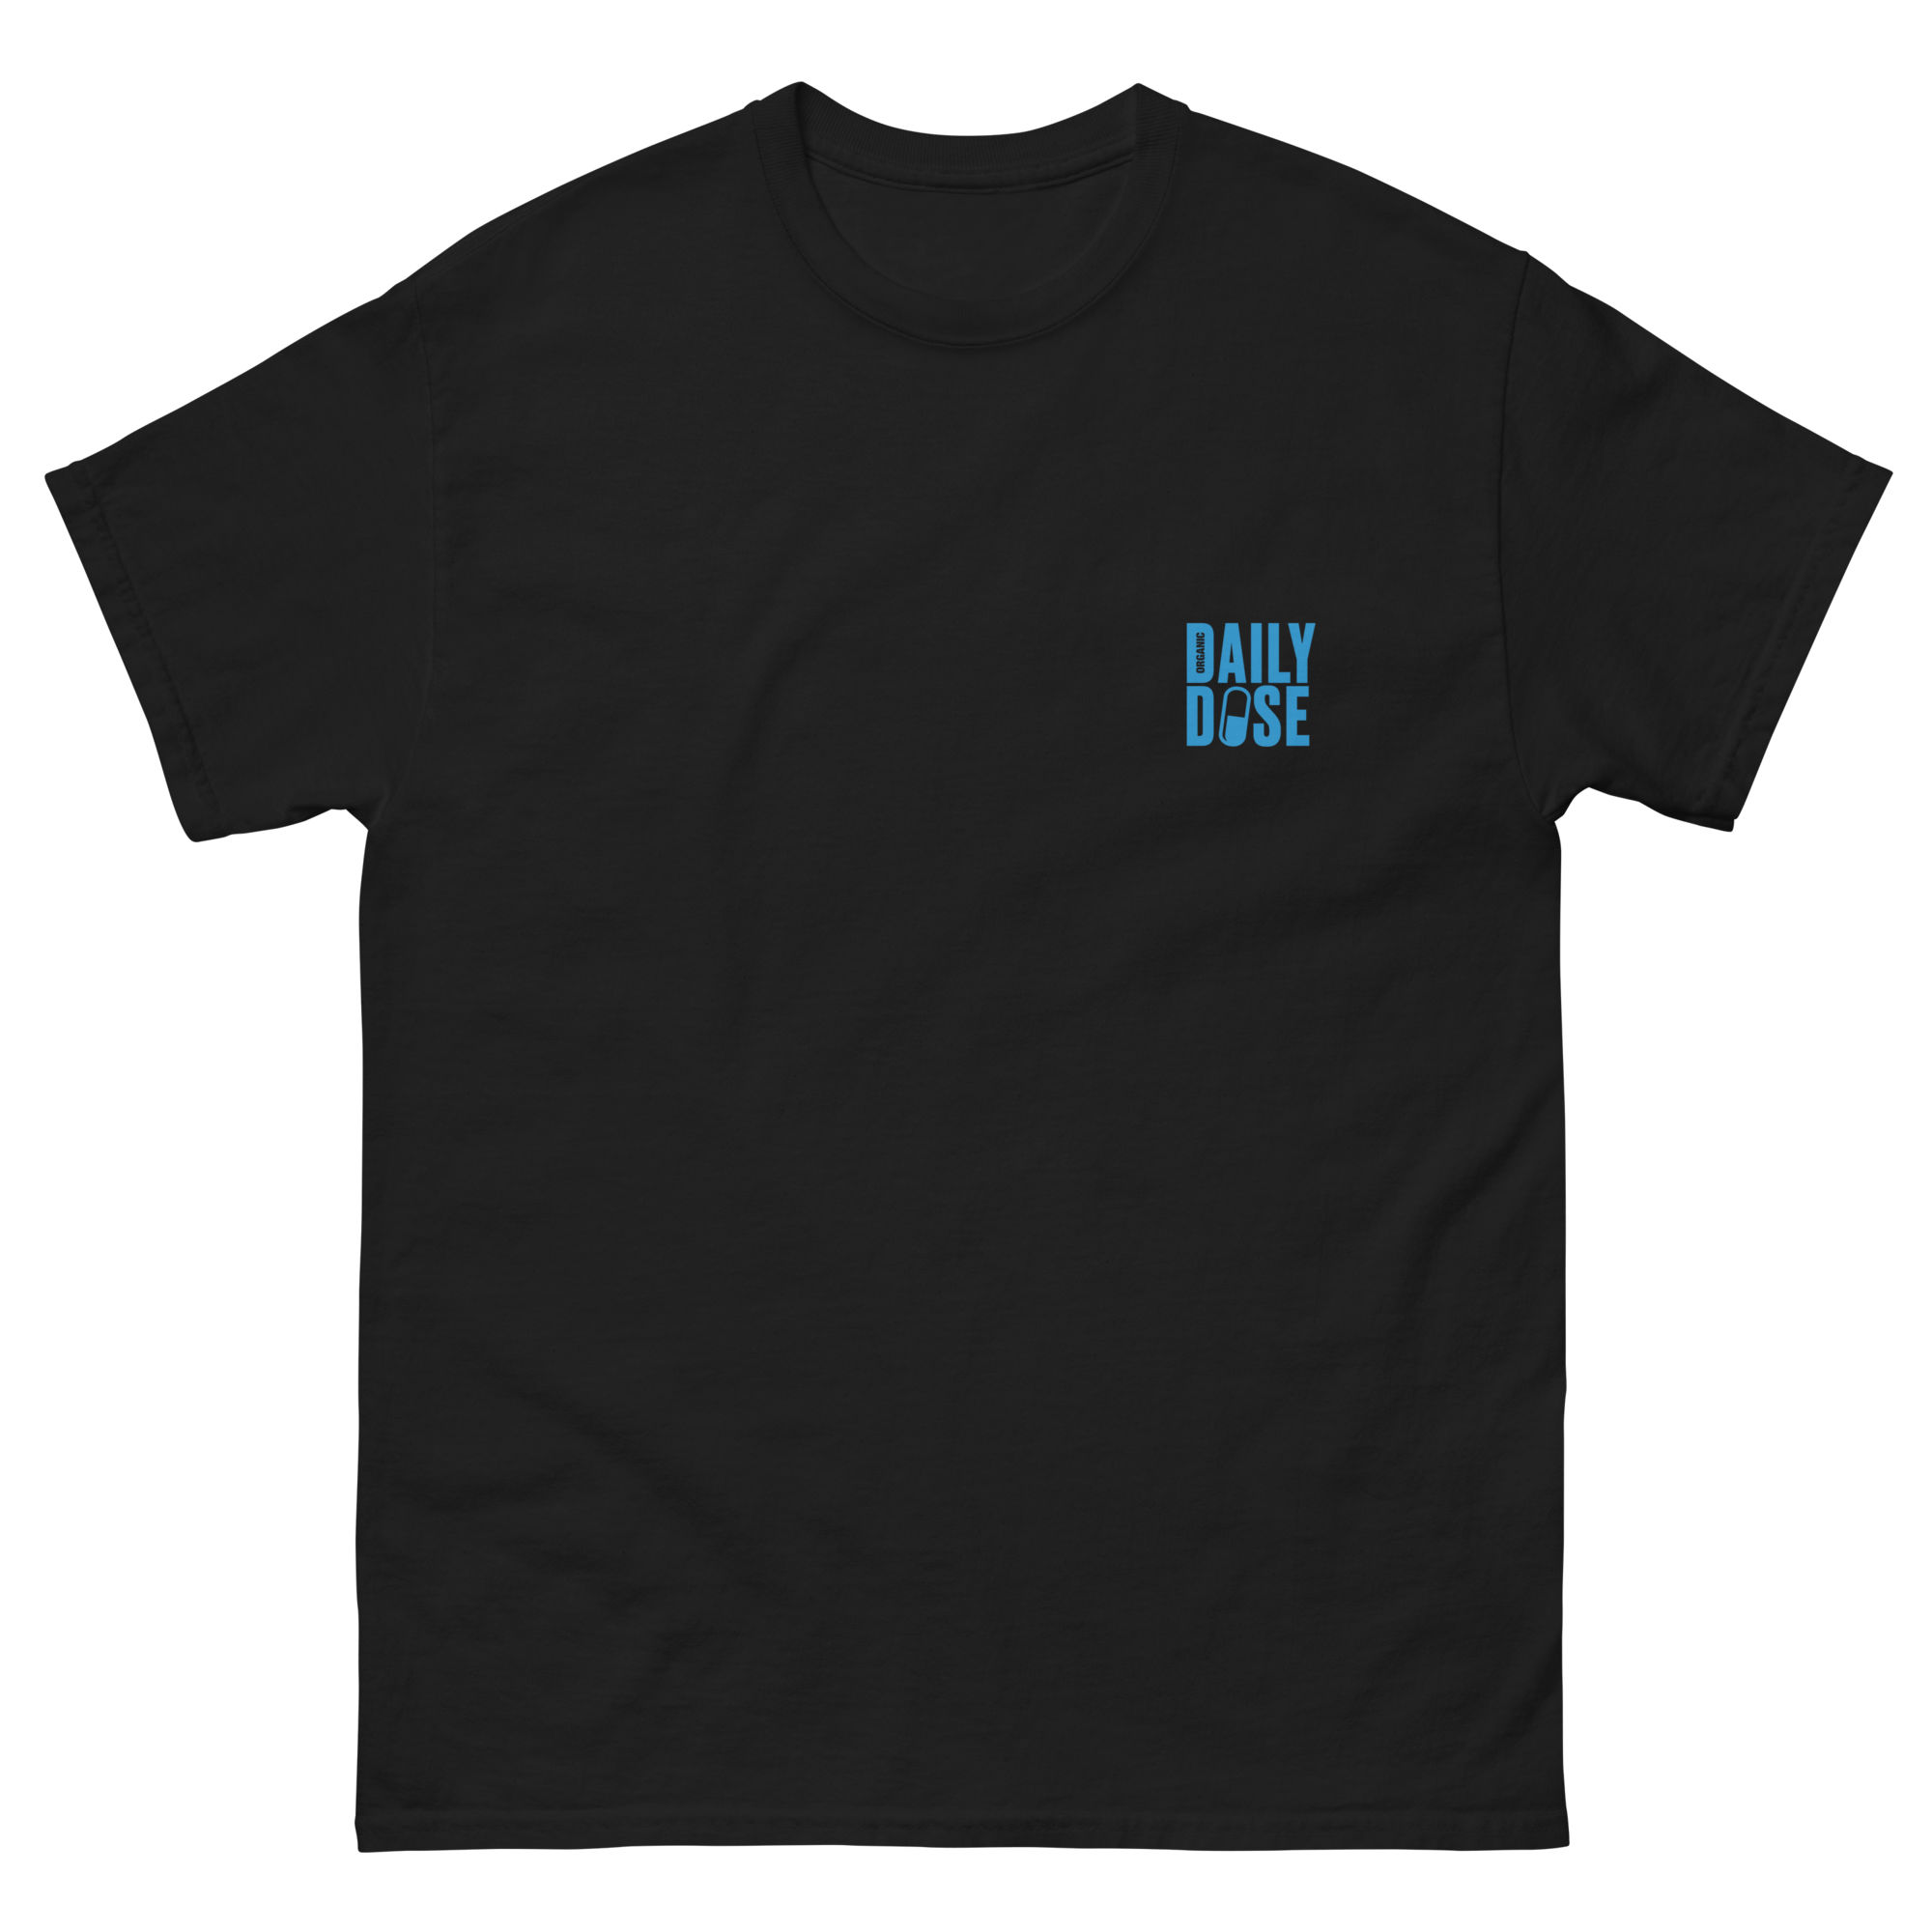 mens classic tee black front only good stuff - Daily Dose